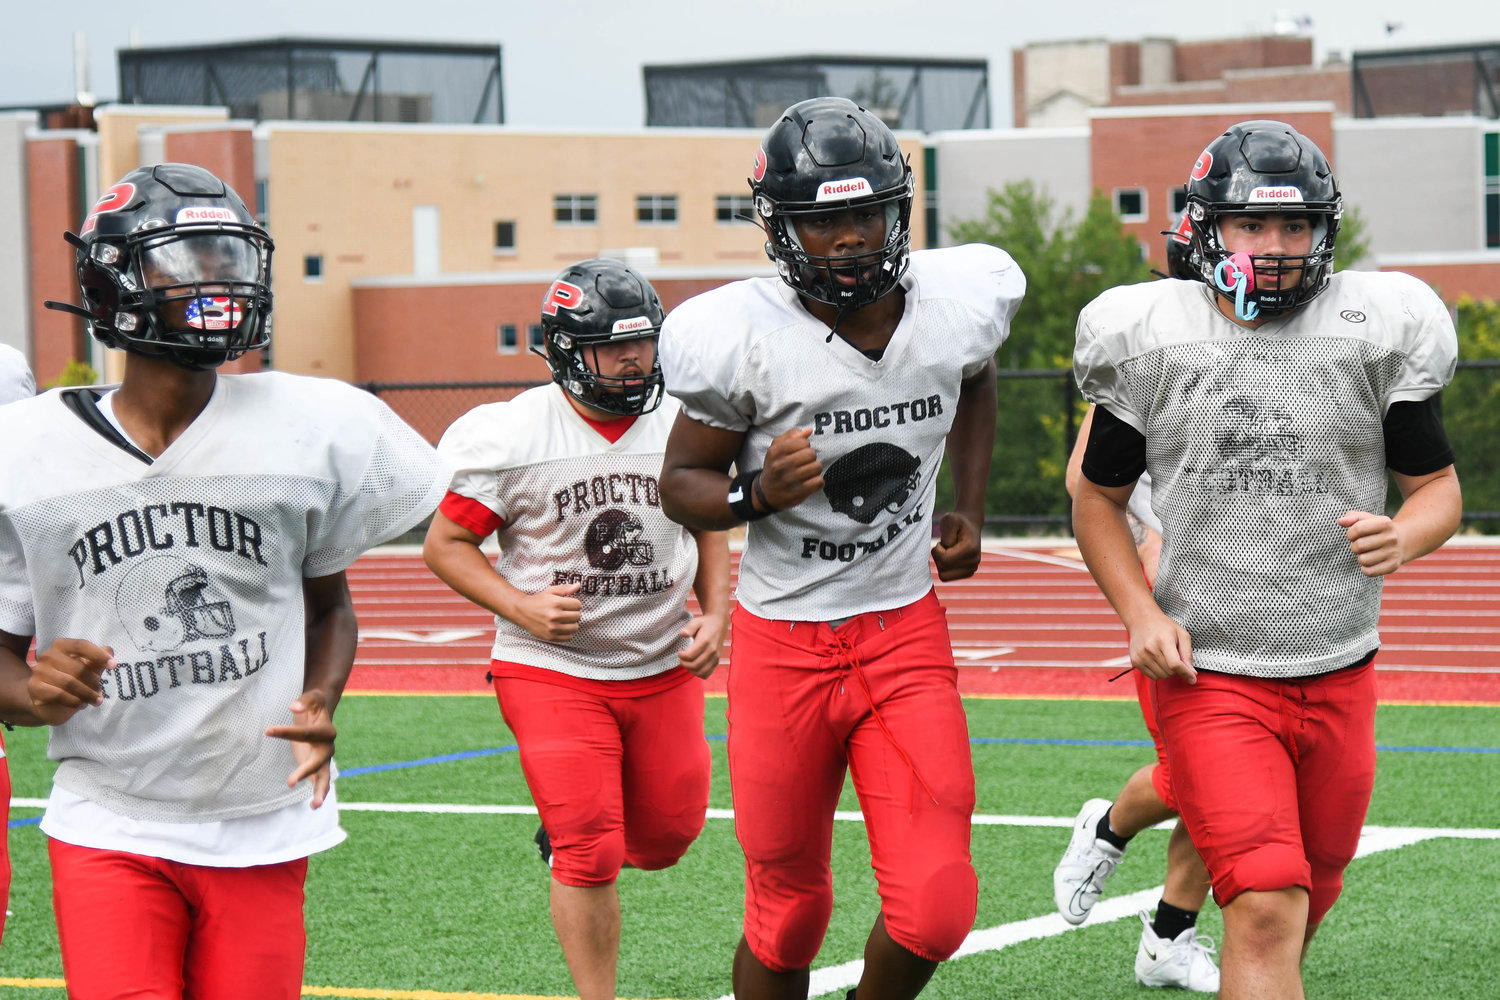 Proctor players switch stations during conditioning drills in an Aug. 30 practice.